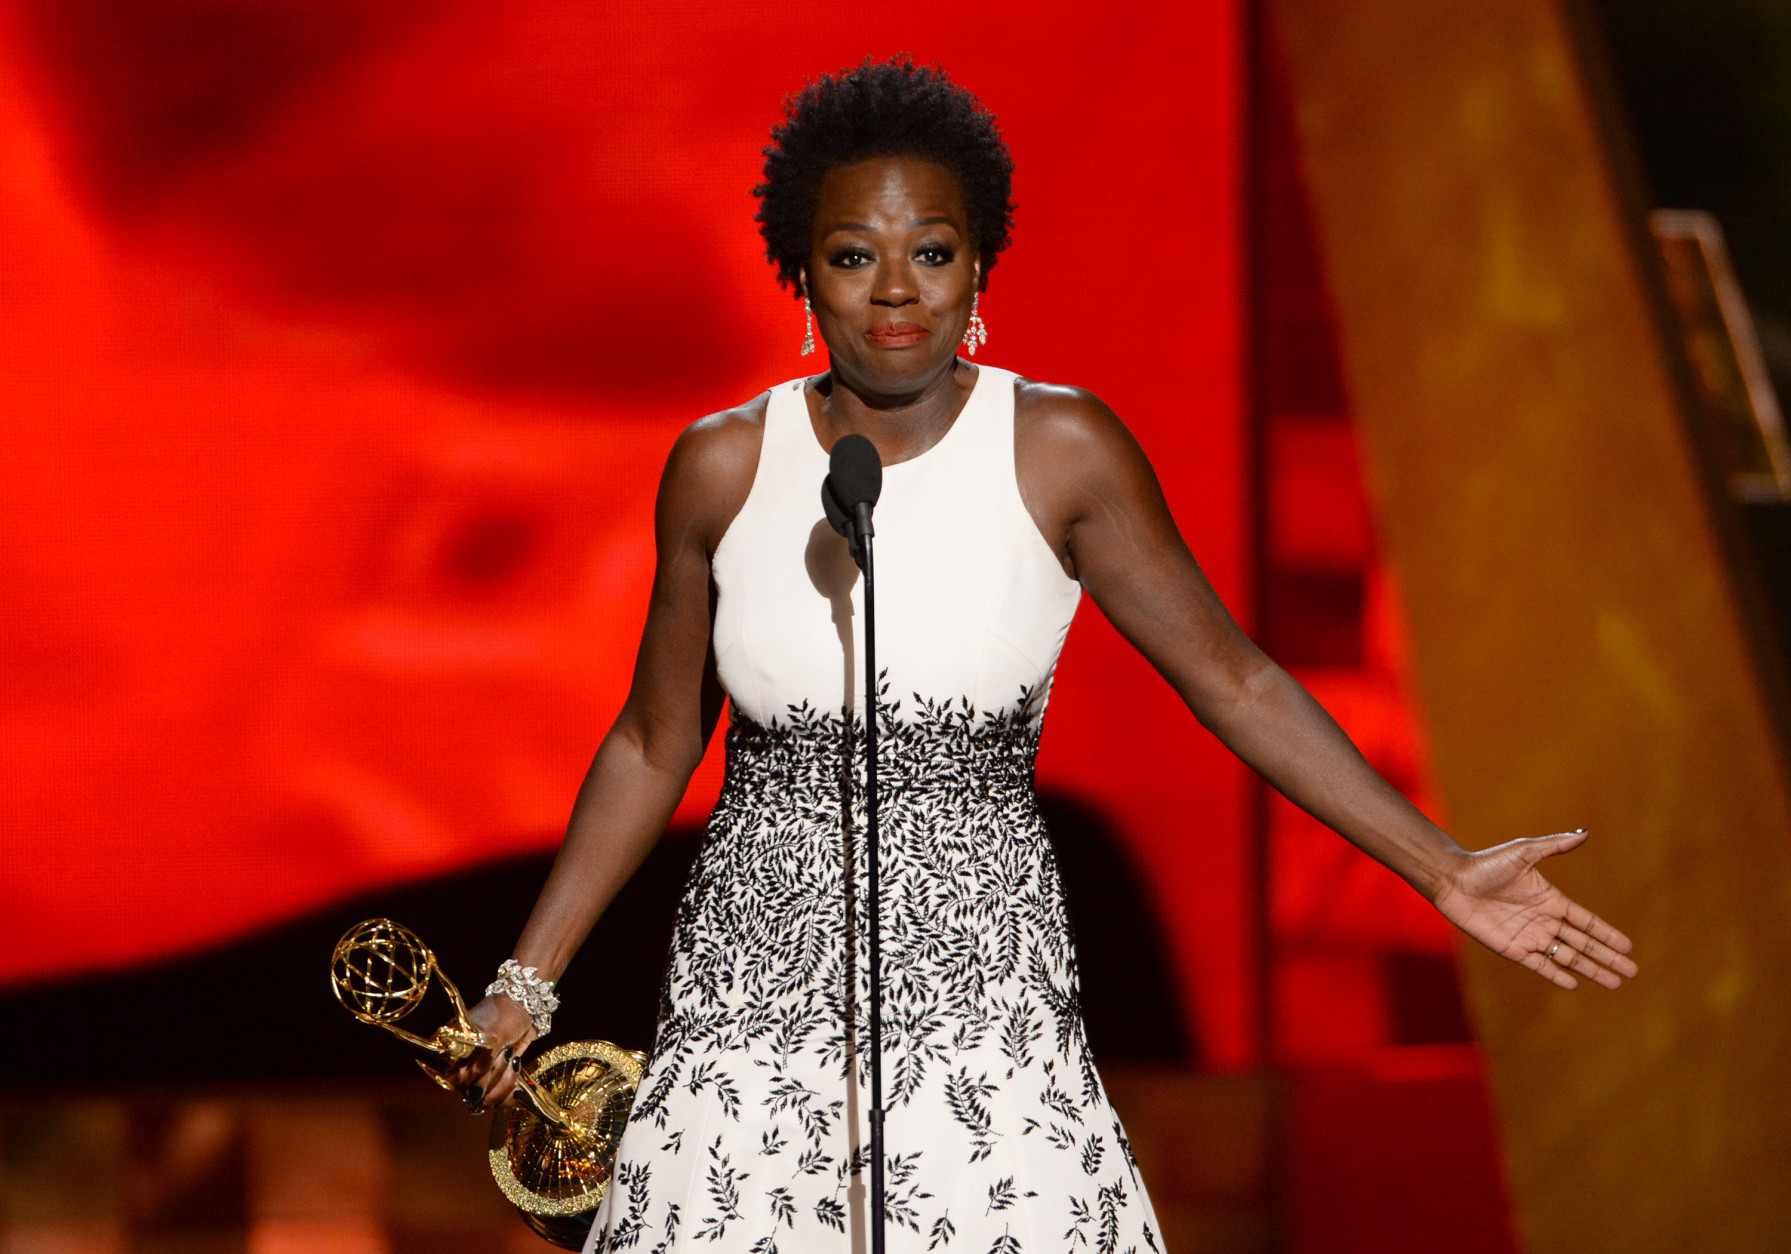 IMAGE DISTRIBUTED FOR THE TELEVISION ACADEMY - Viola Davis accepts the award for outstanding lead actress in a drama series for How to Get Away With Murder at the 67th Primetime Emmy Awards on Sunday, Sept. 20, 2015, at the Microsoft Theater in Los Angeles. (Photo by Phil McCarten/Invision for the Television Academy/AP Images)